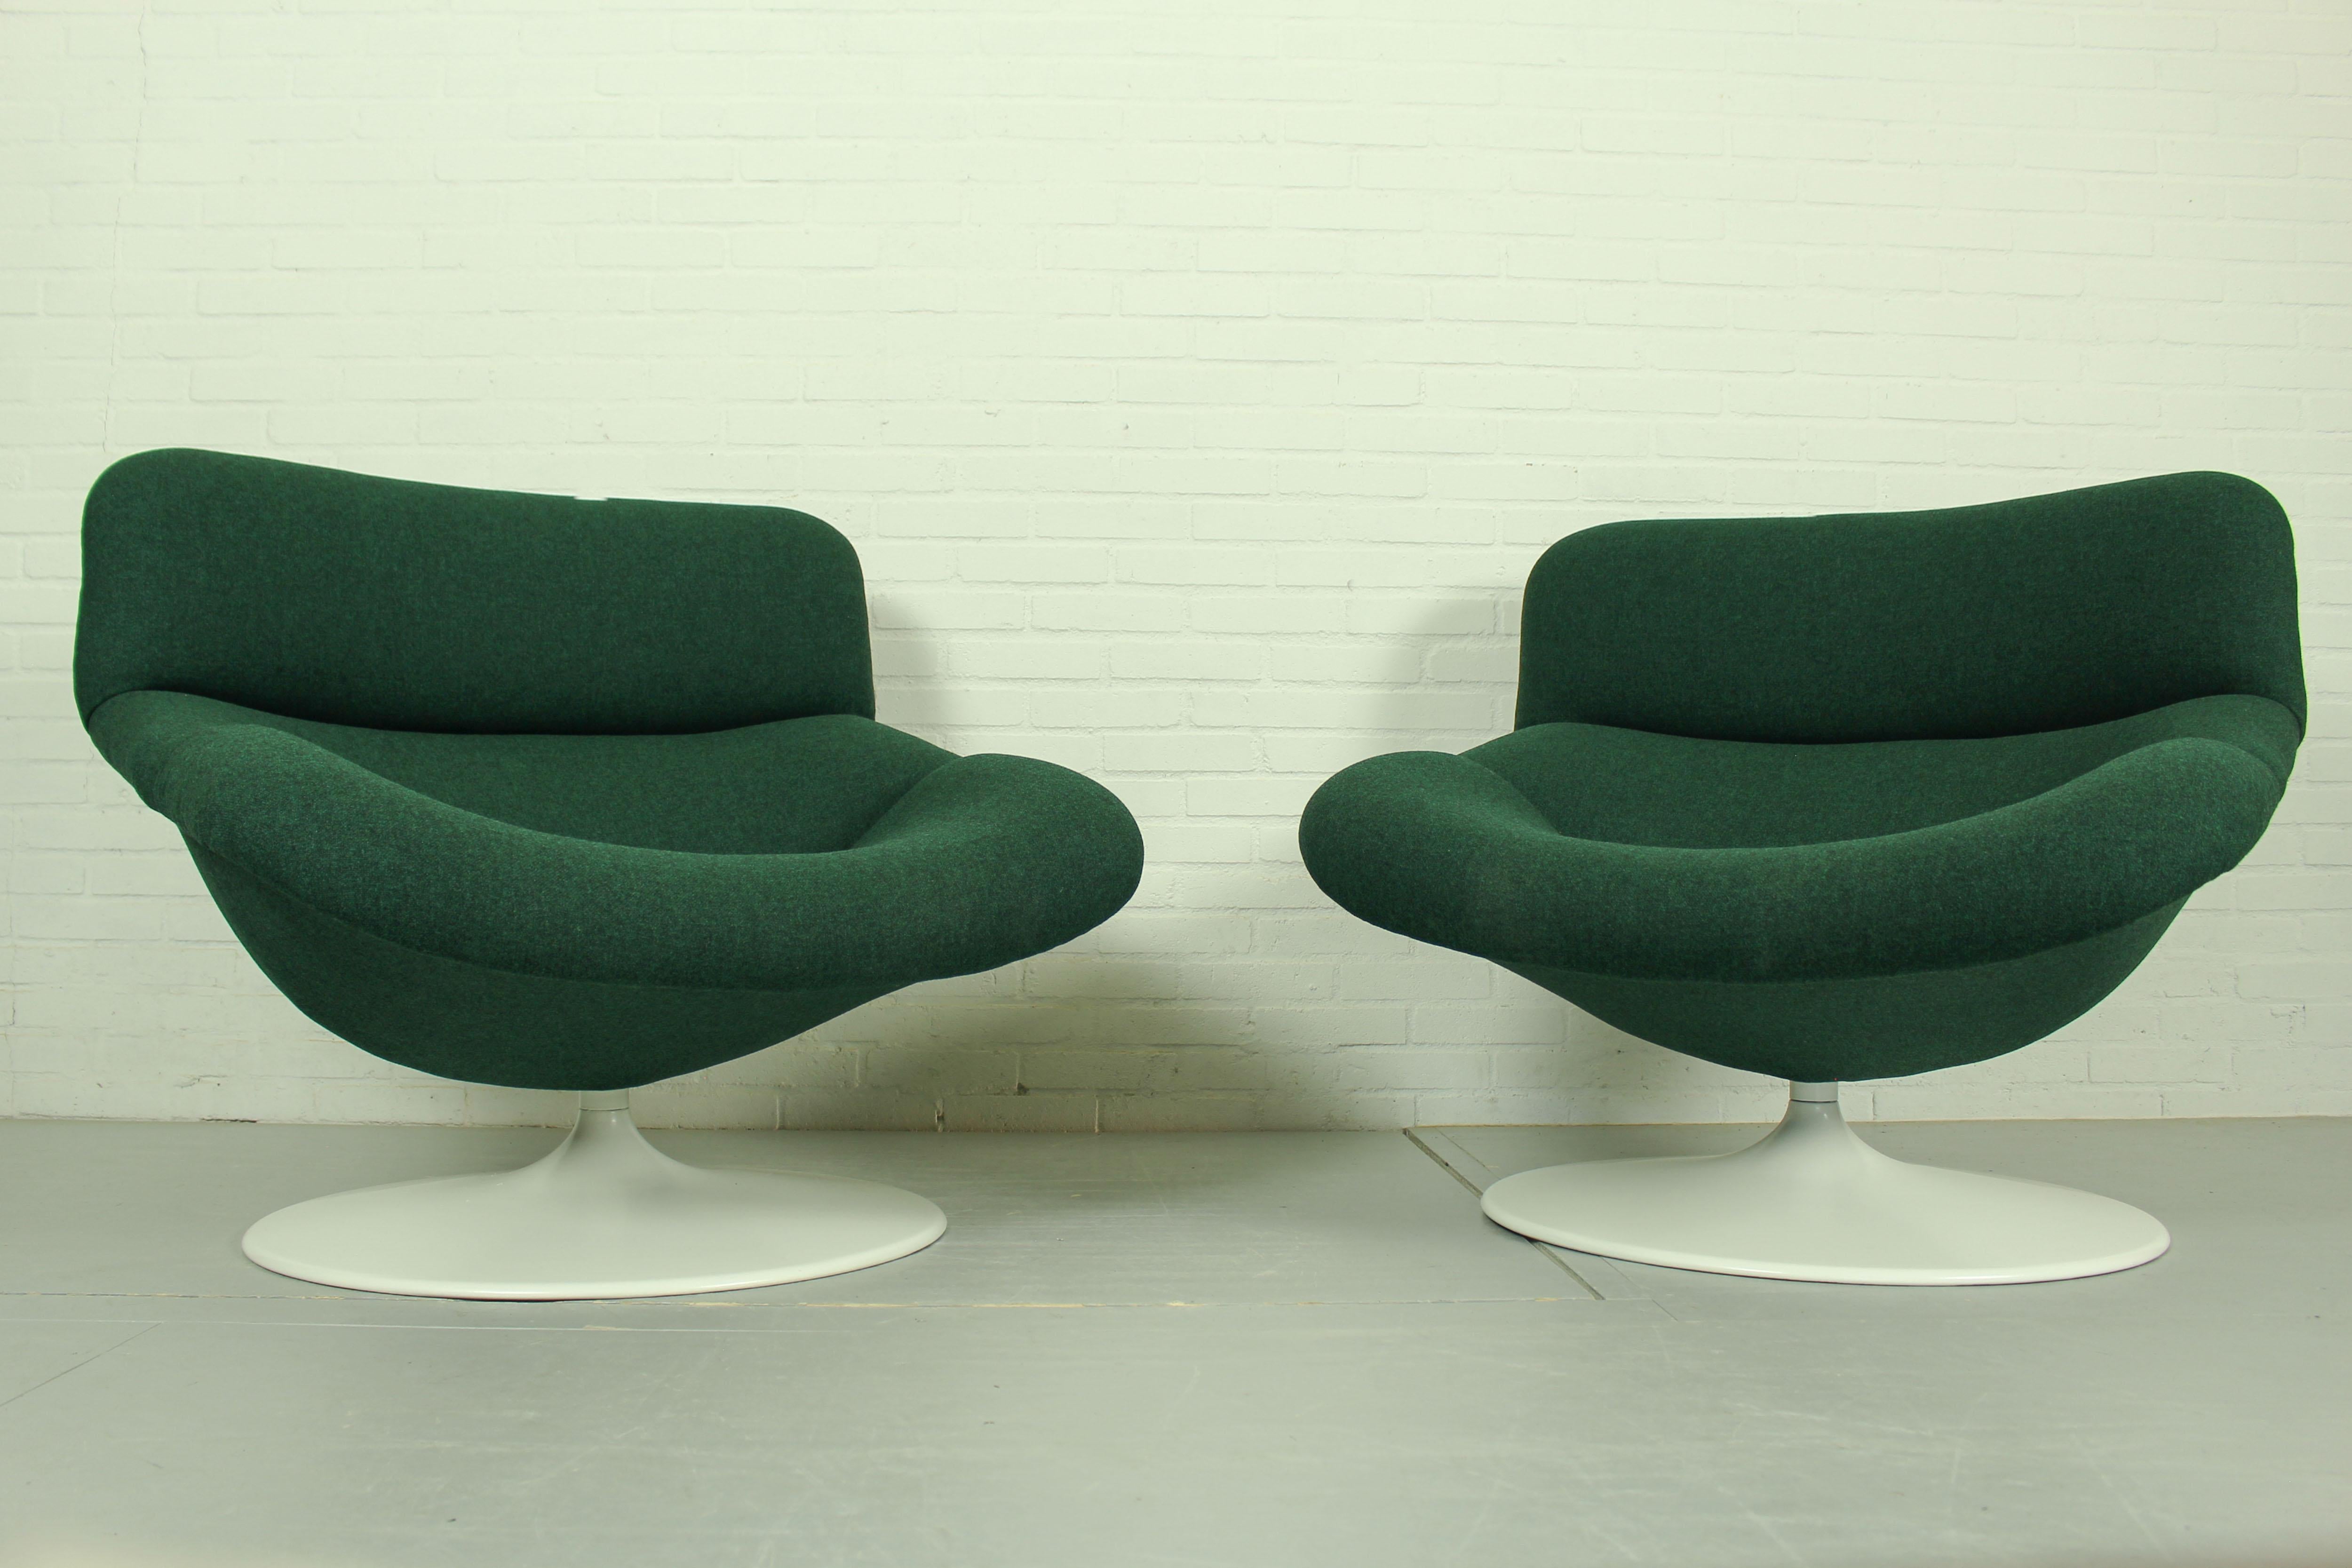 Lounge Swivel Chairs by Geoffrey Harcourt for Artifort, 1980. Model F518. The chairs have a metal round base. Reupholstered with high quality green fabric Kvadrat Tonica. In a very good condition. 

Dimensions: 90 cm W, 90 cm D, 81 cm h.